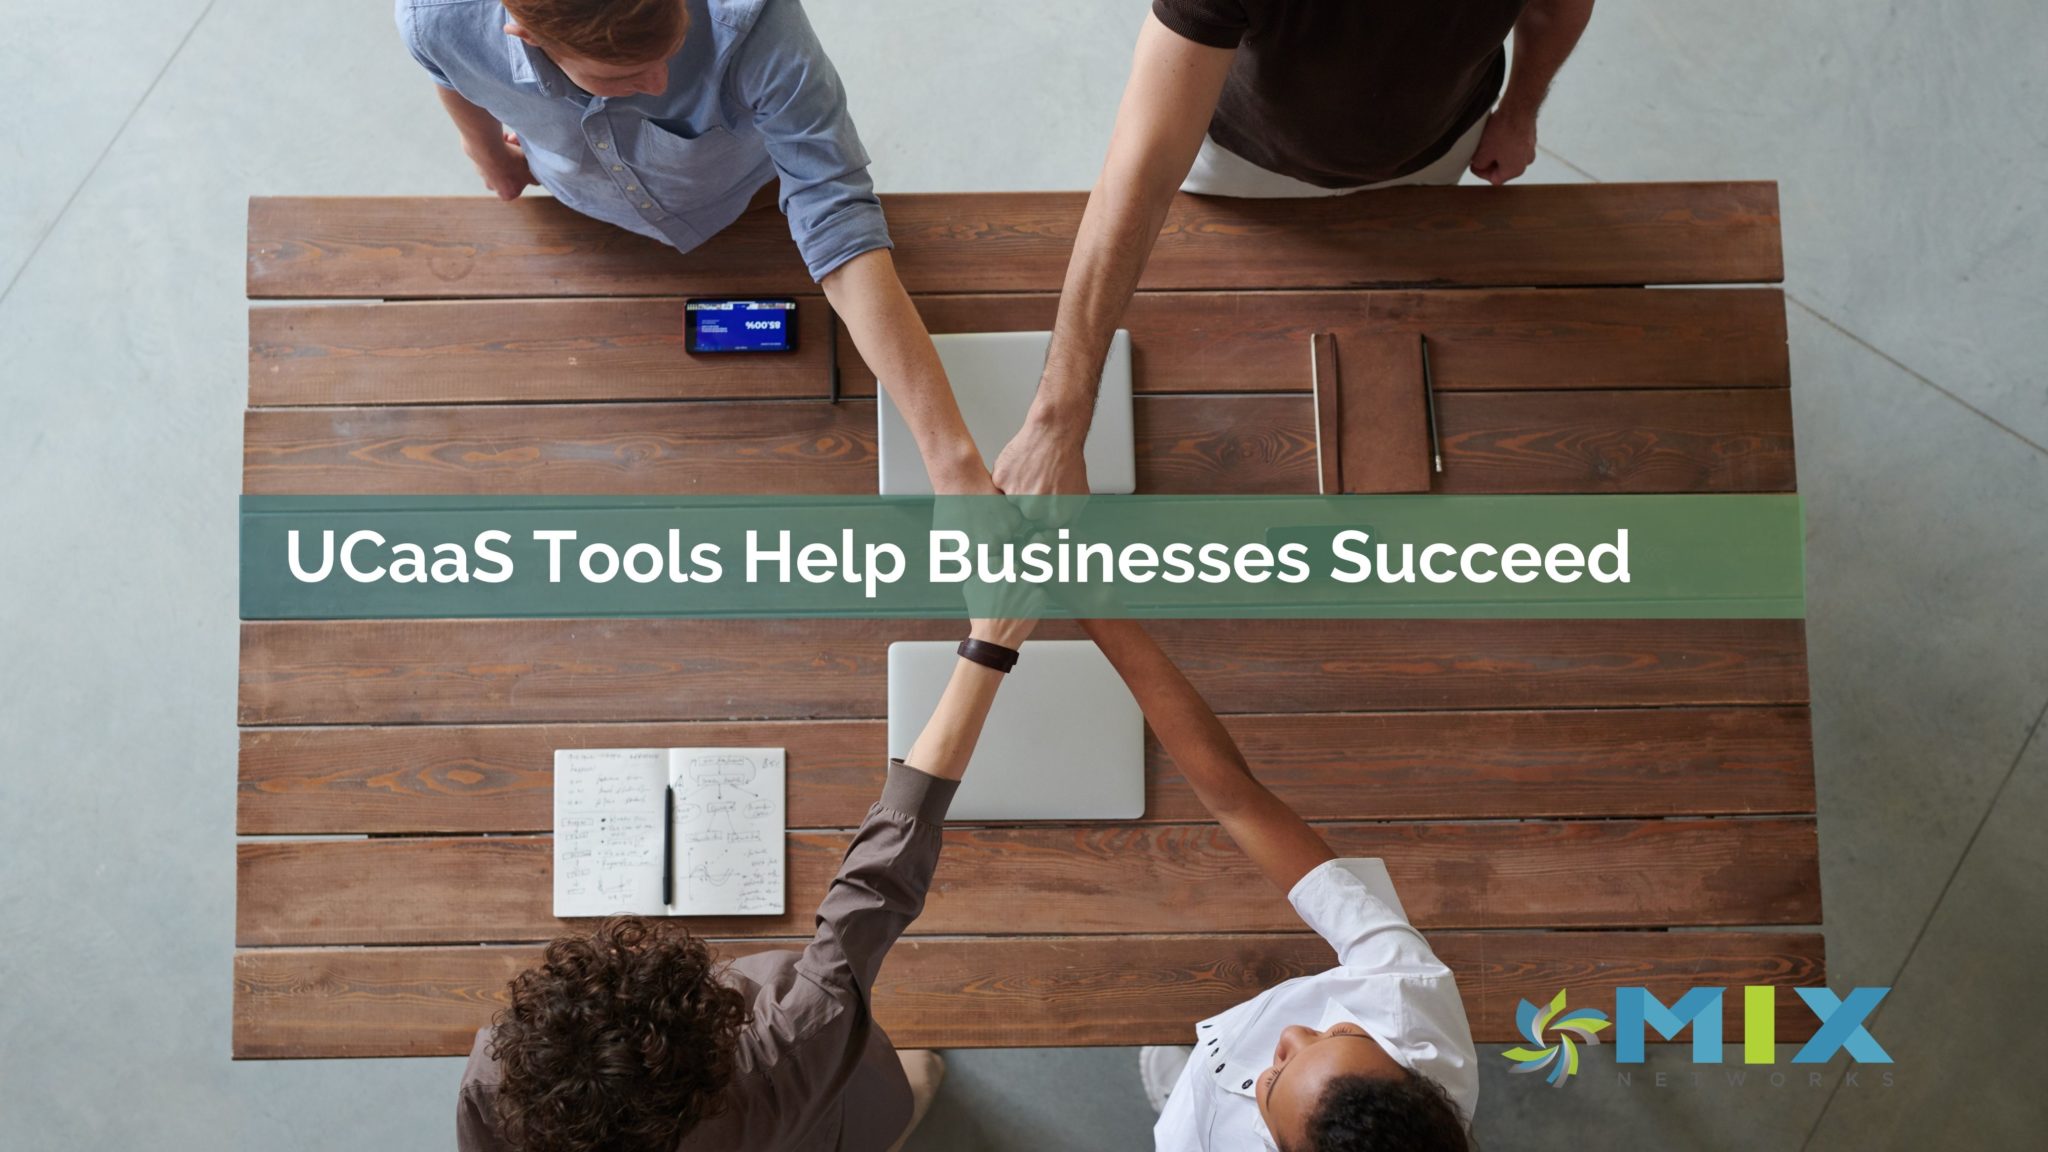 Unified-Communications-as-a-Service (UCaaS) helps businesses succeed